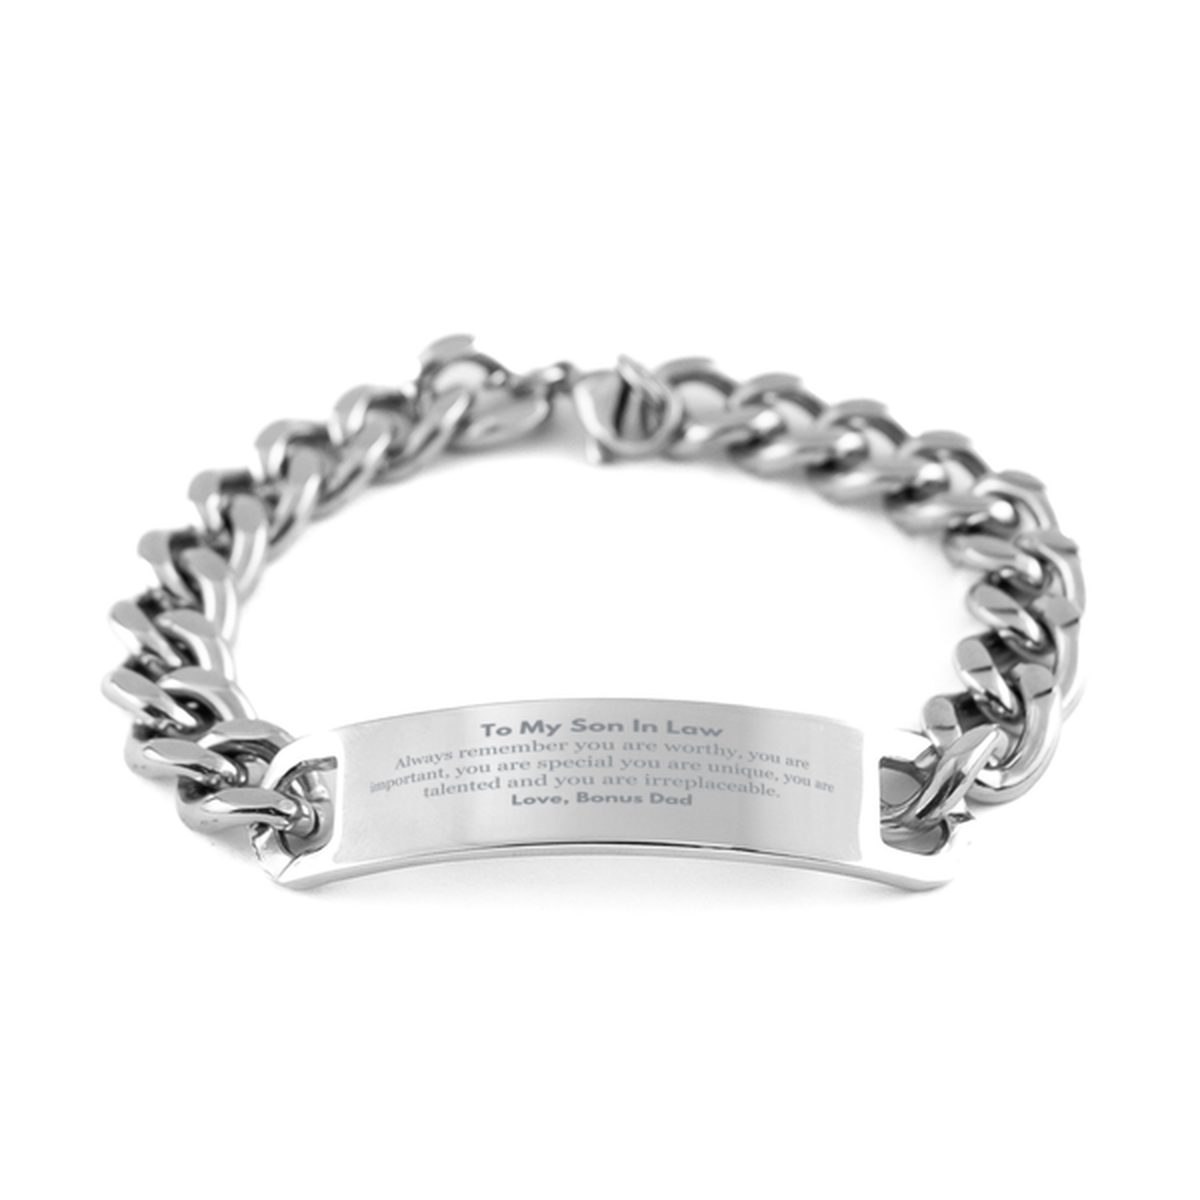 Son In Law Birthday Gifts from Bonus Dad, Inspirational Cuban Chain Stainless Steel Bracelet for Son In Law Christmas Graduation Gifts for Son In Law Always remember you are worthy, you are important. Love, Bonus Dad